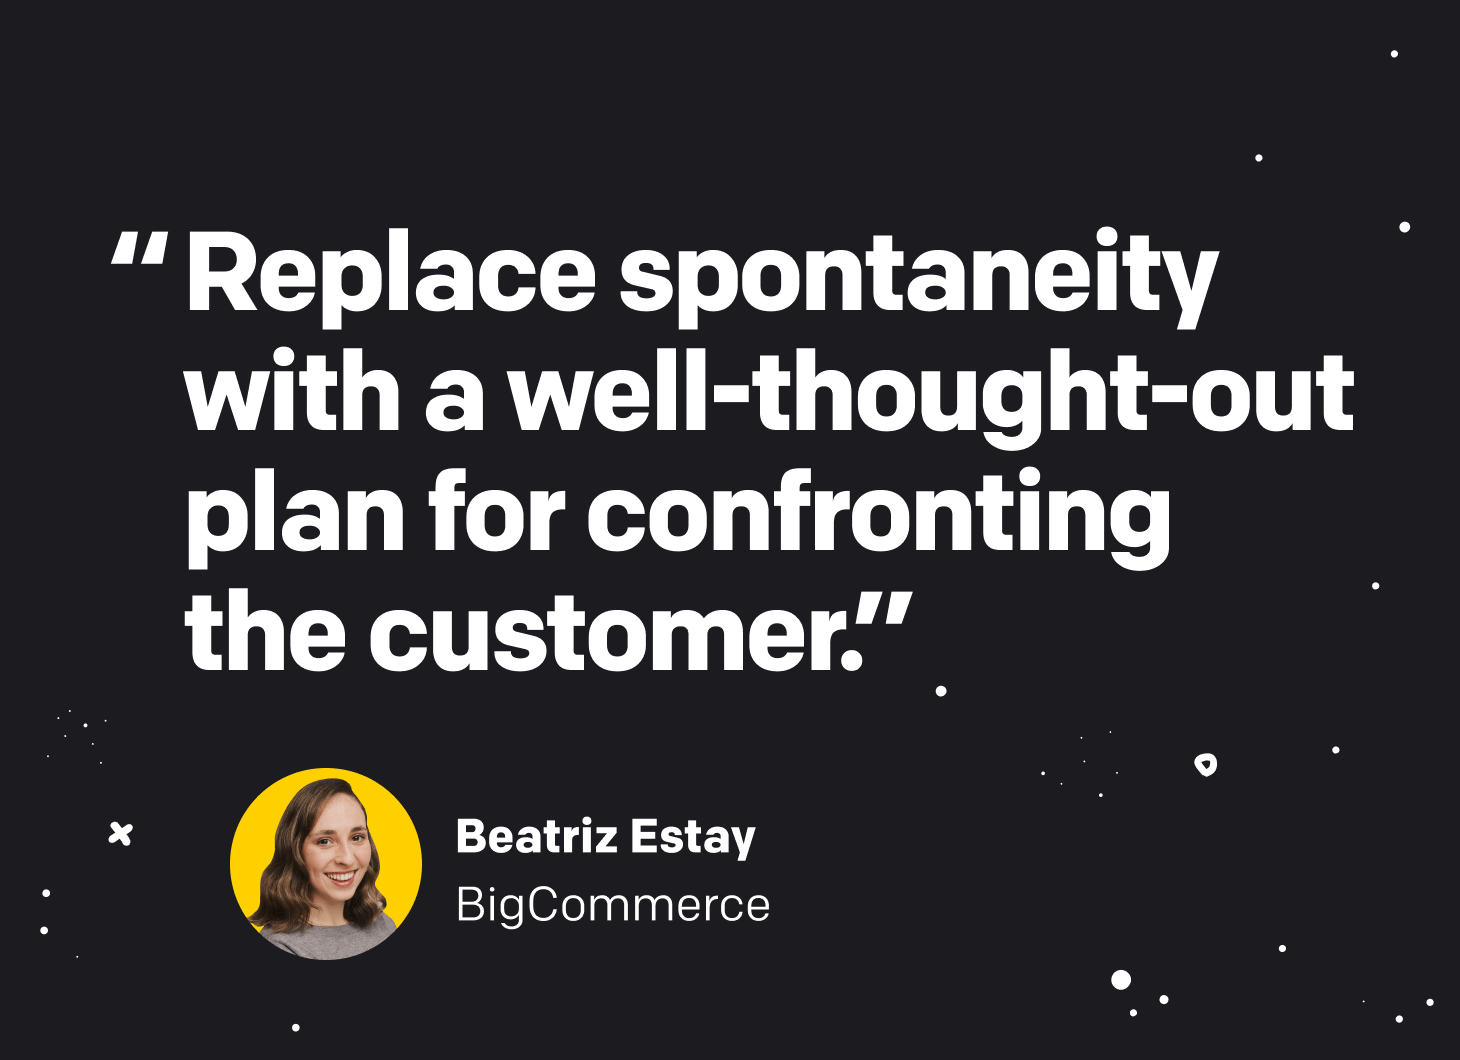 Quote from Beatriz Estay from BigCommerce.